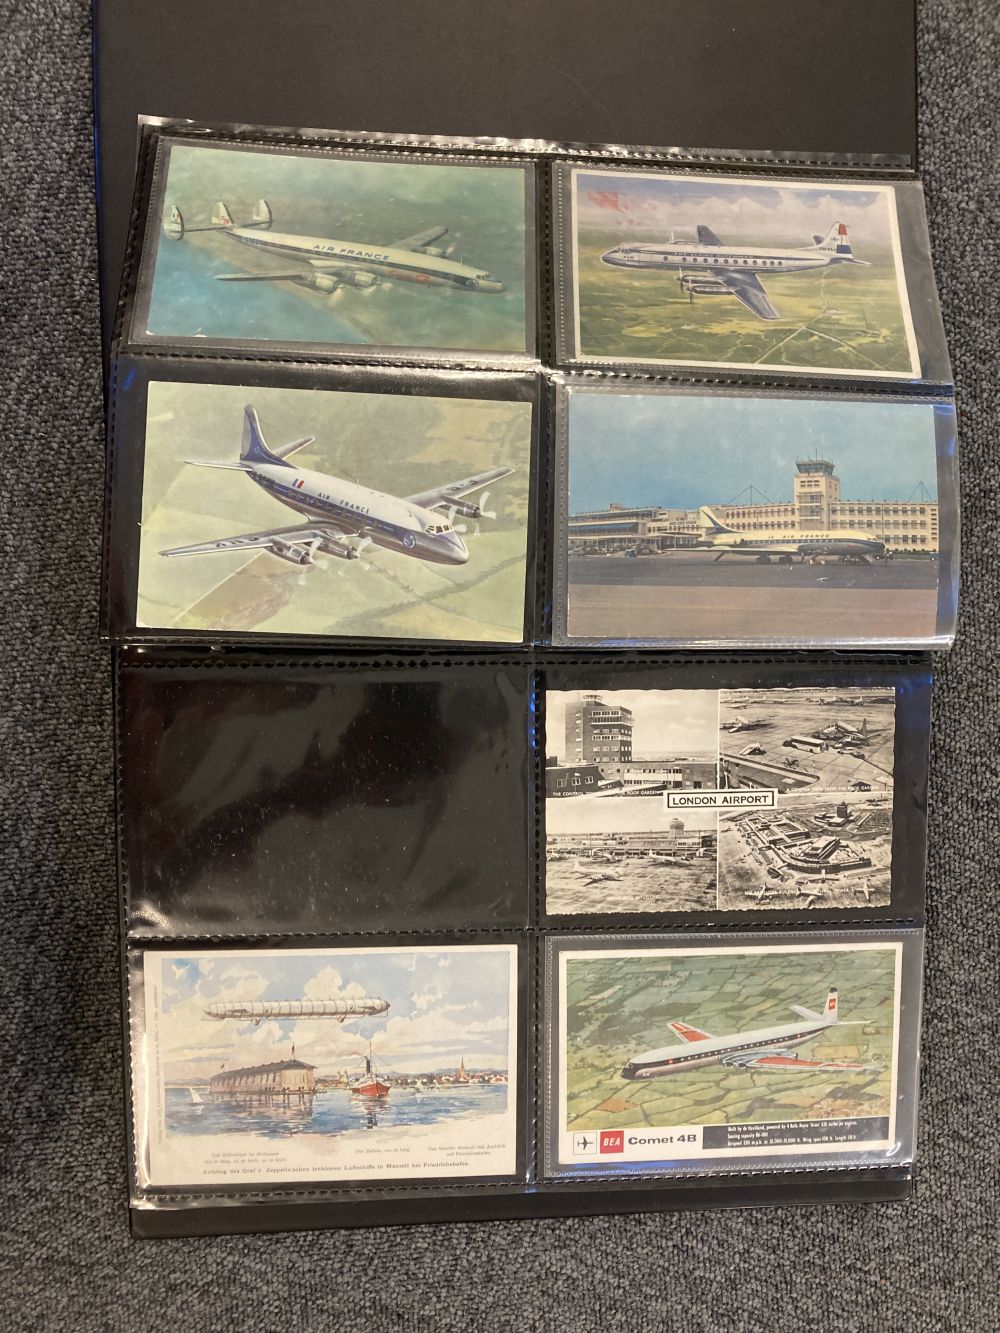 Aviation Postcards. Collection of 196 aviation postcards, 1950/60s - Image 4 of 7